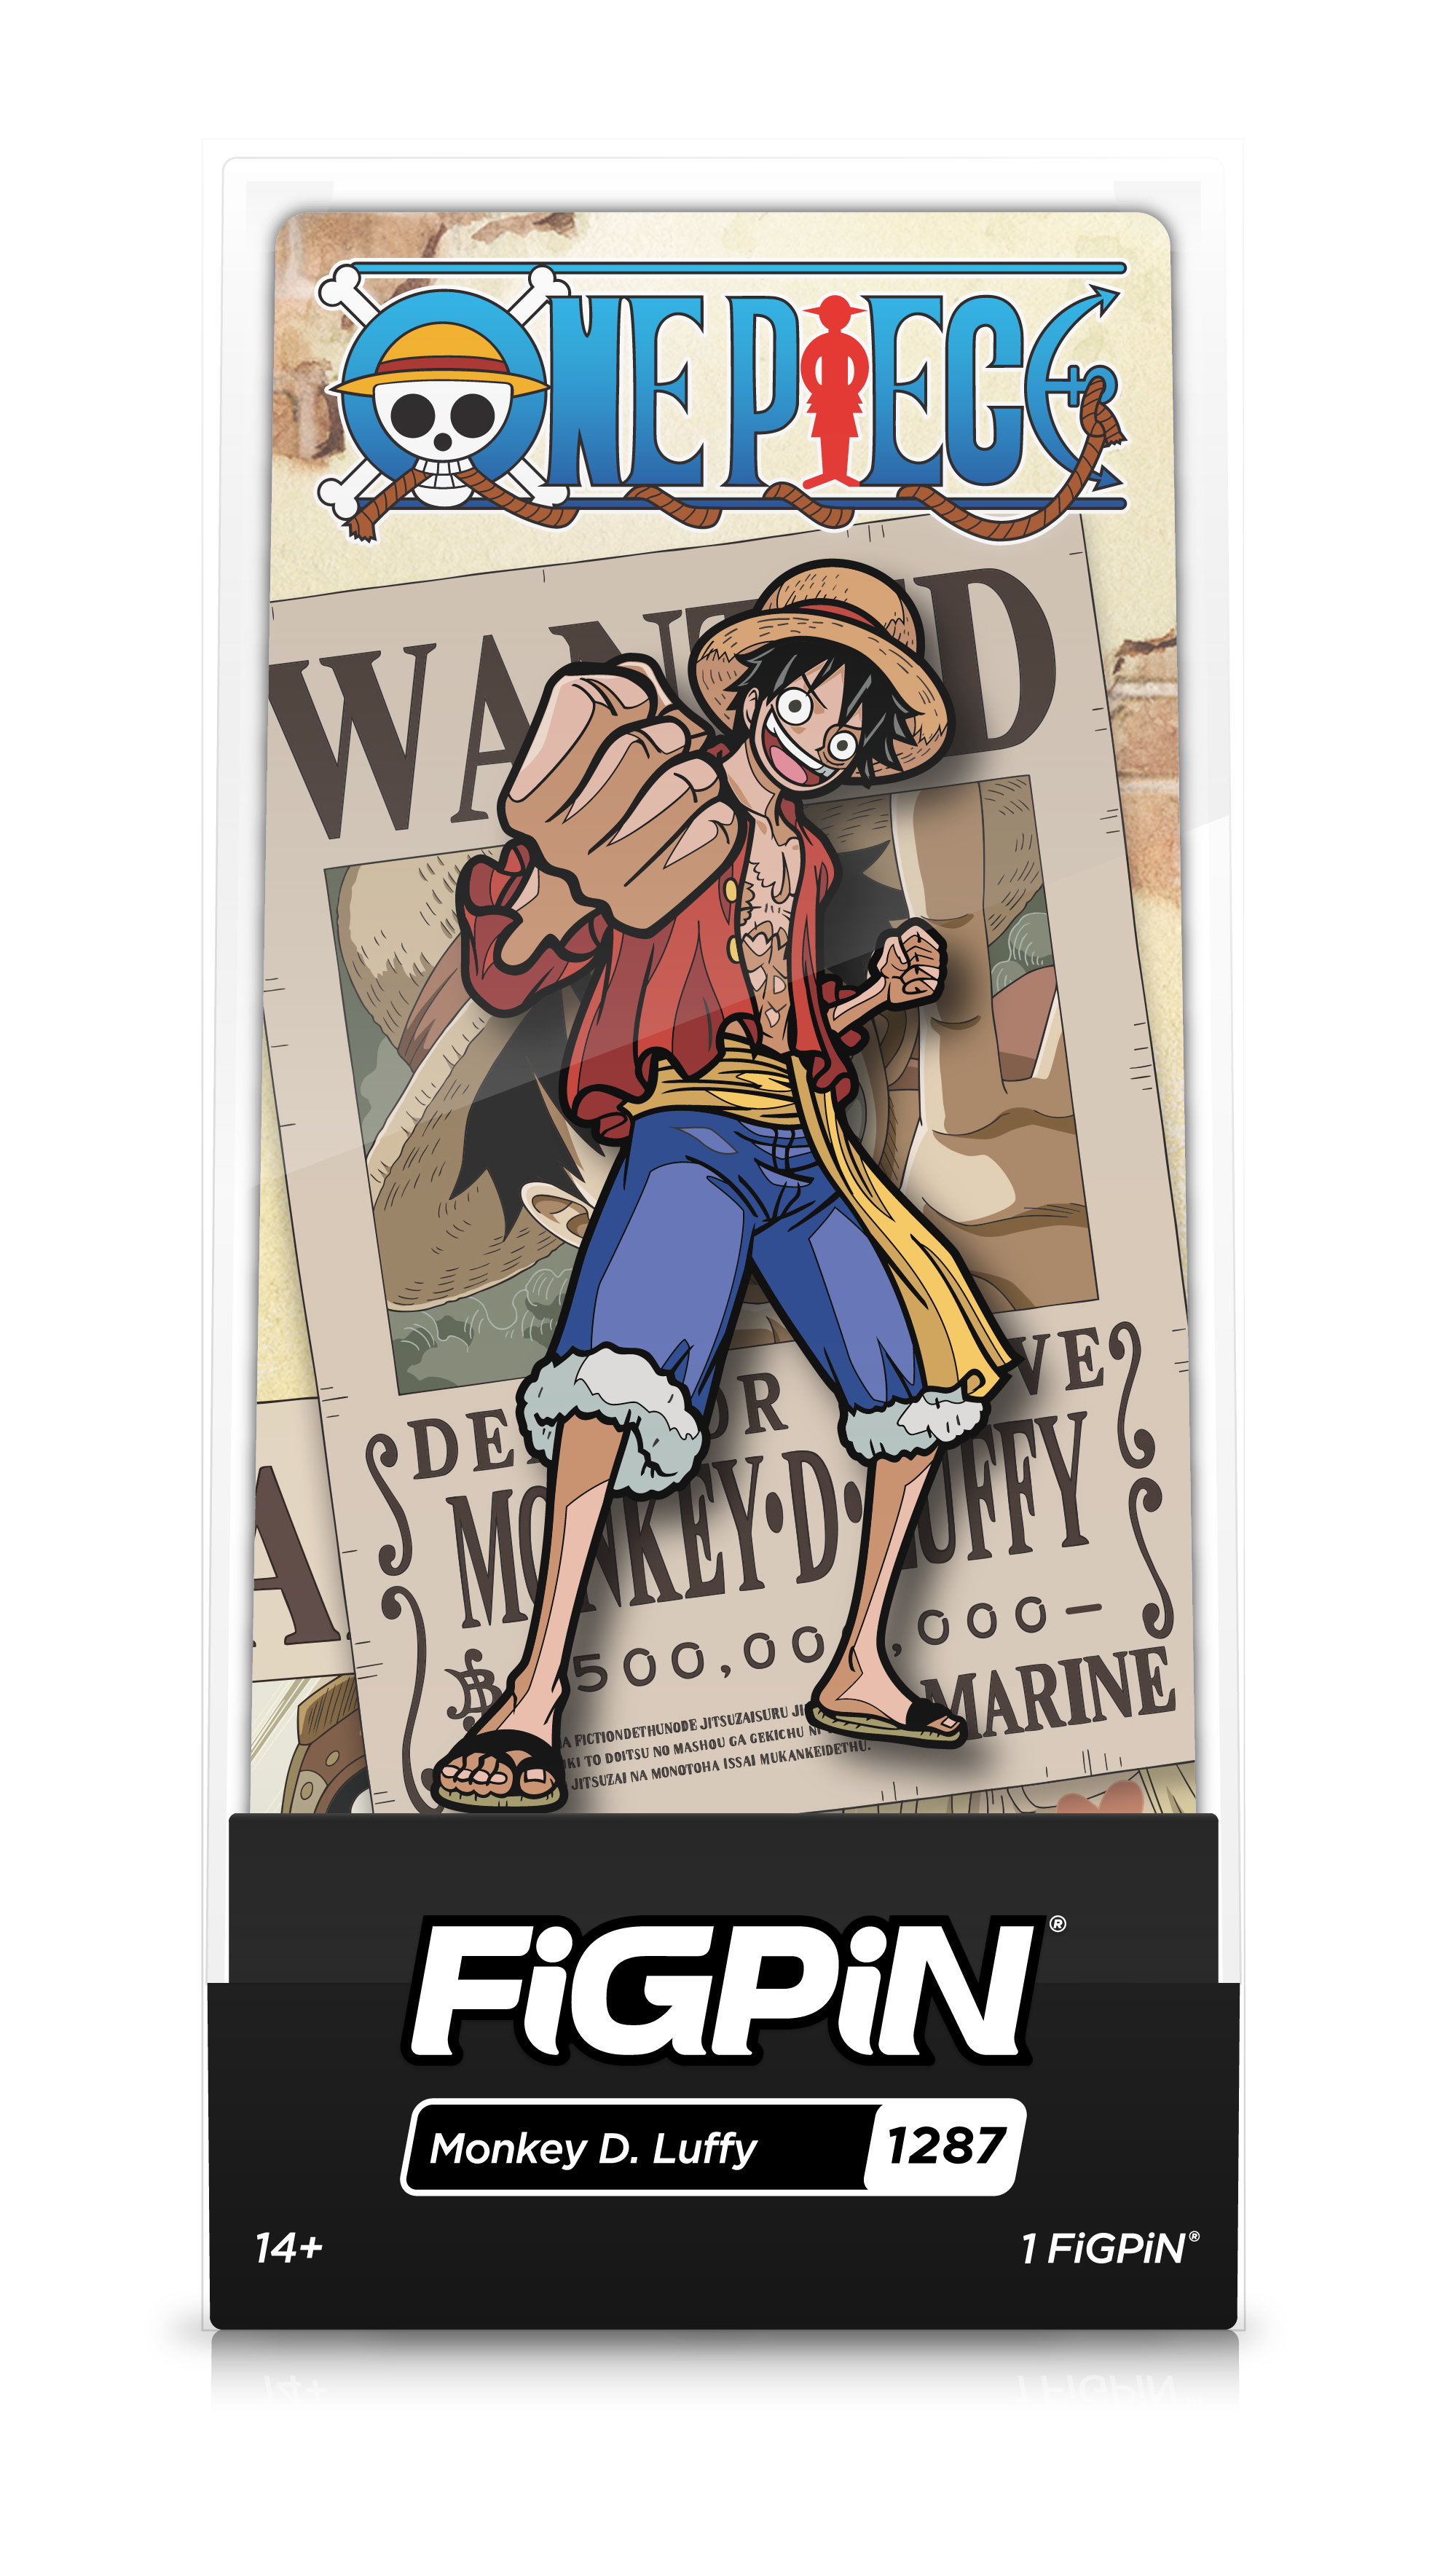 Front view of One Piece's Monkey D. Luffy enamel pin inside FiGPiN Display case reading “FiGPiN - Monkey D. Luffy (1287)”